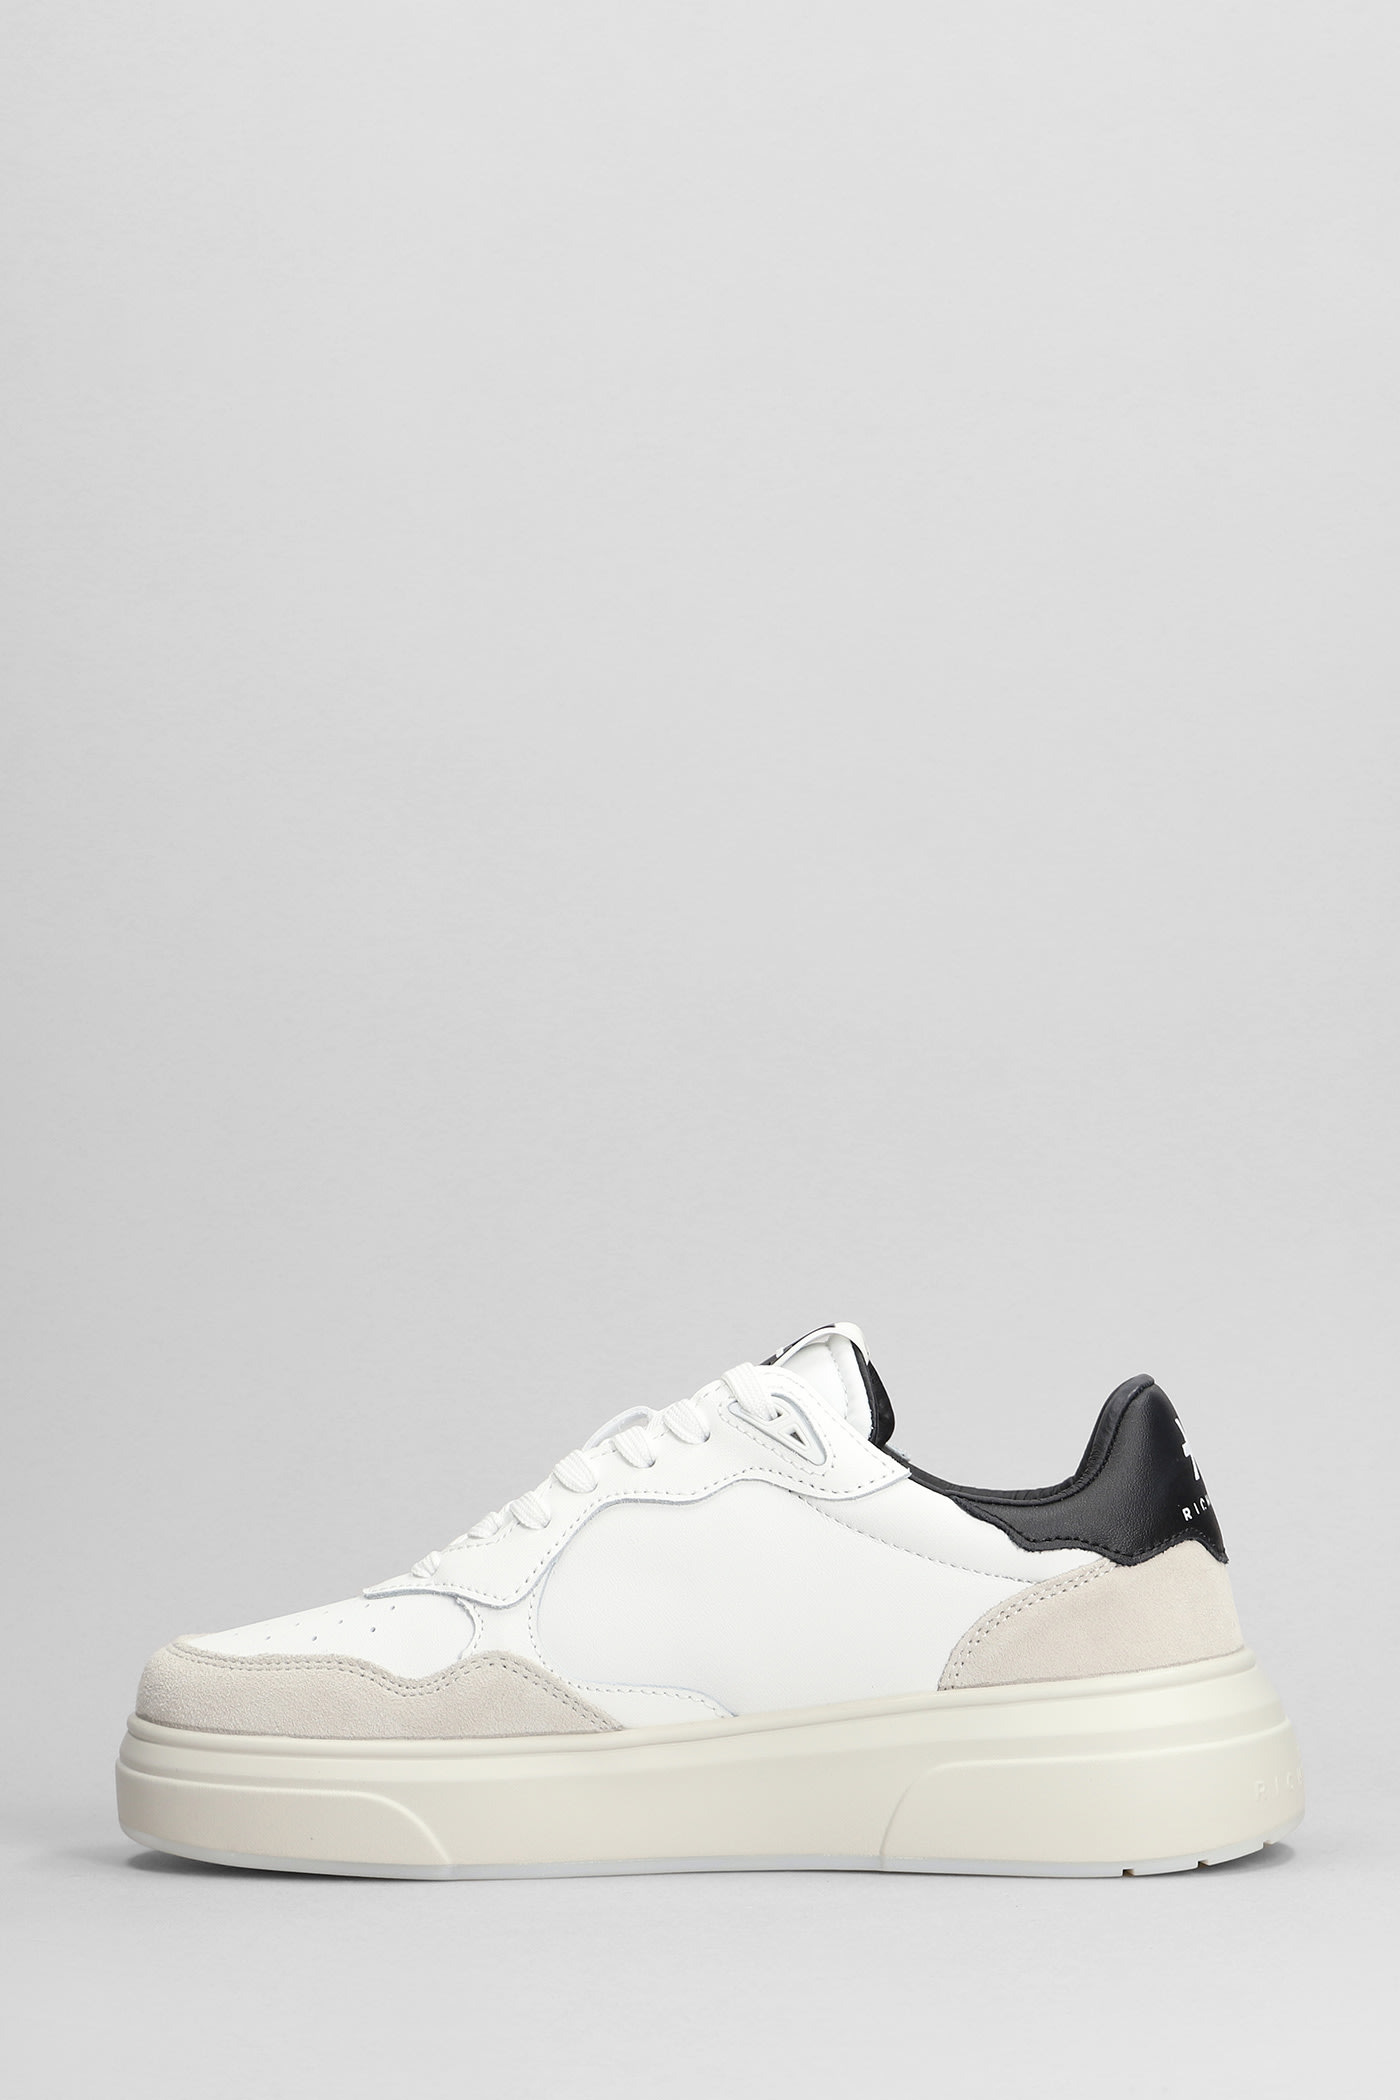 Shop John Richmond Sneakers In White Suede And Leather